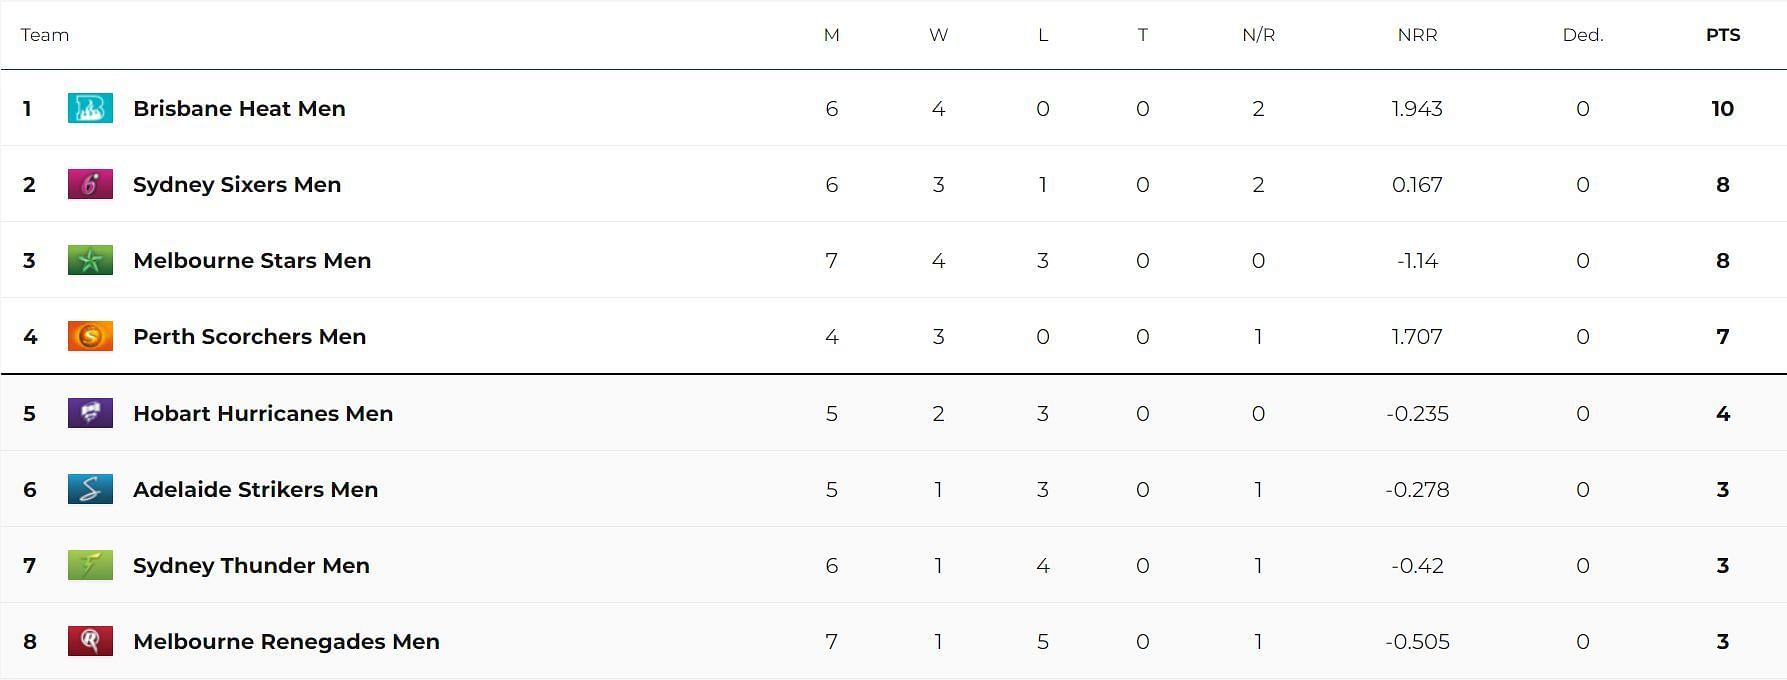 Updated Points Table after Match 23 (Image Courtesy: cricket.com.au)